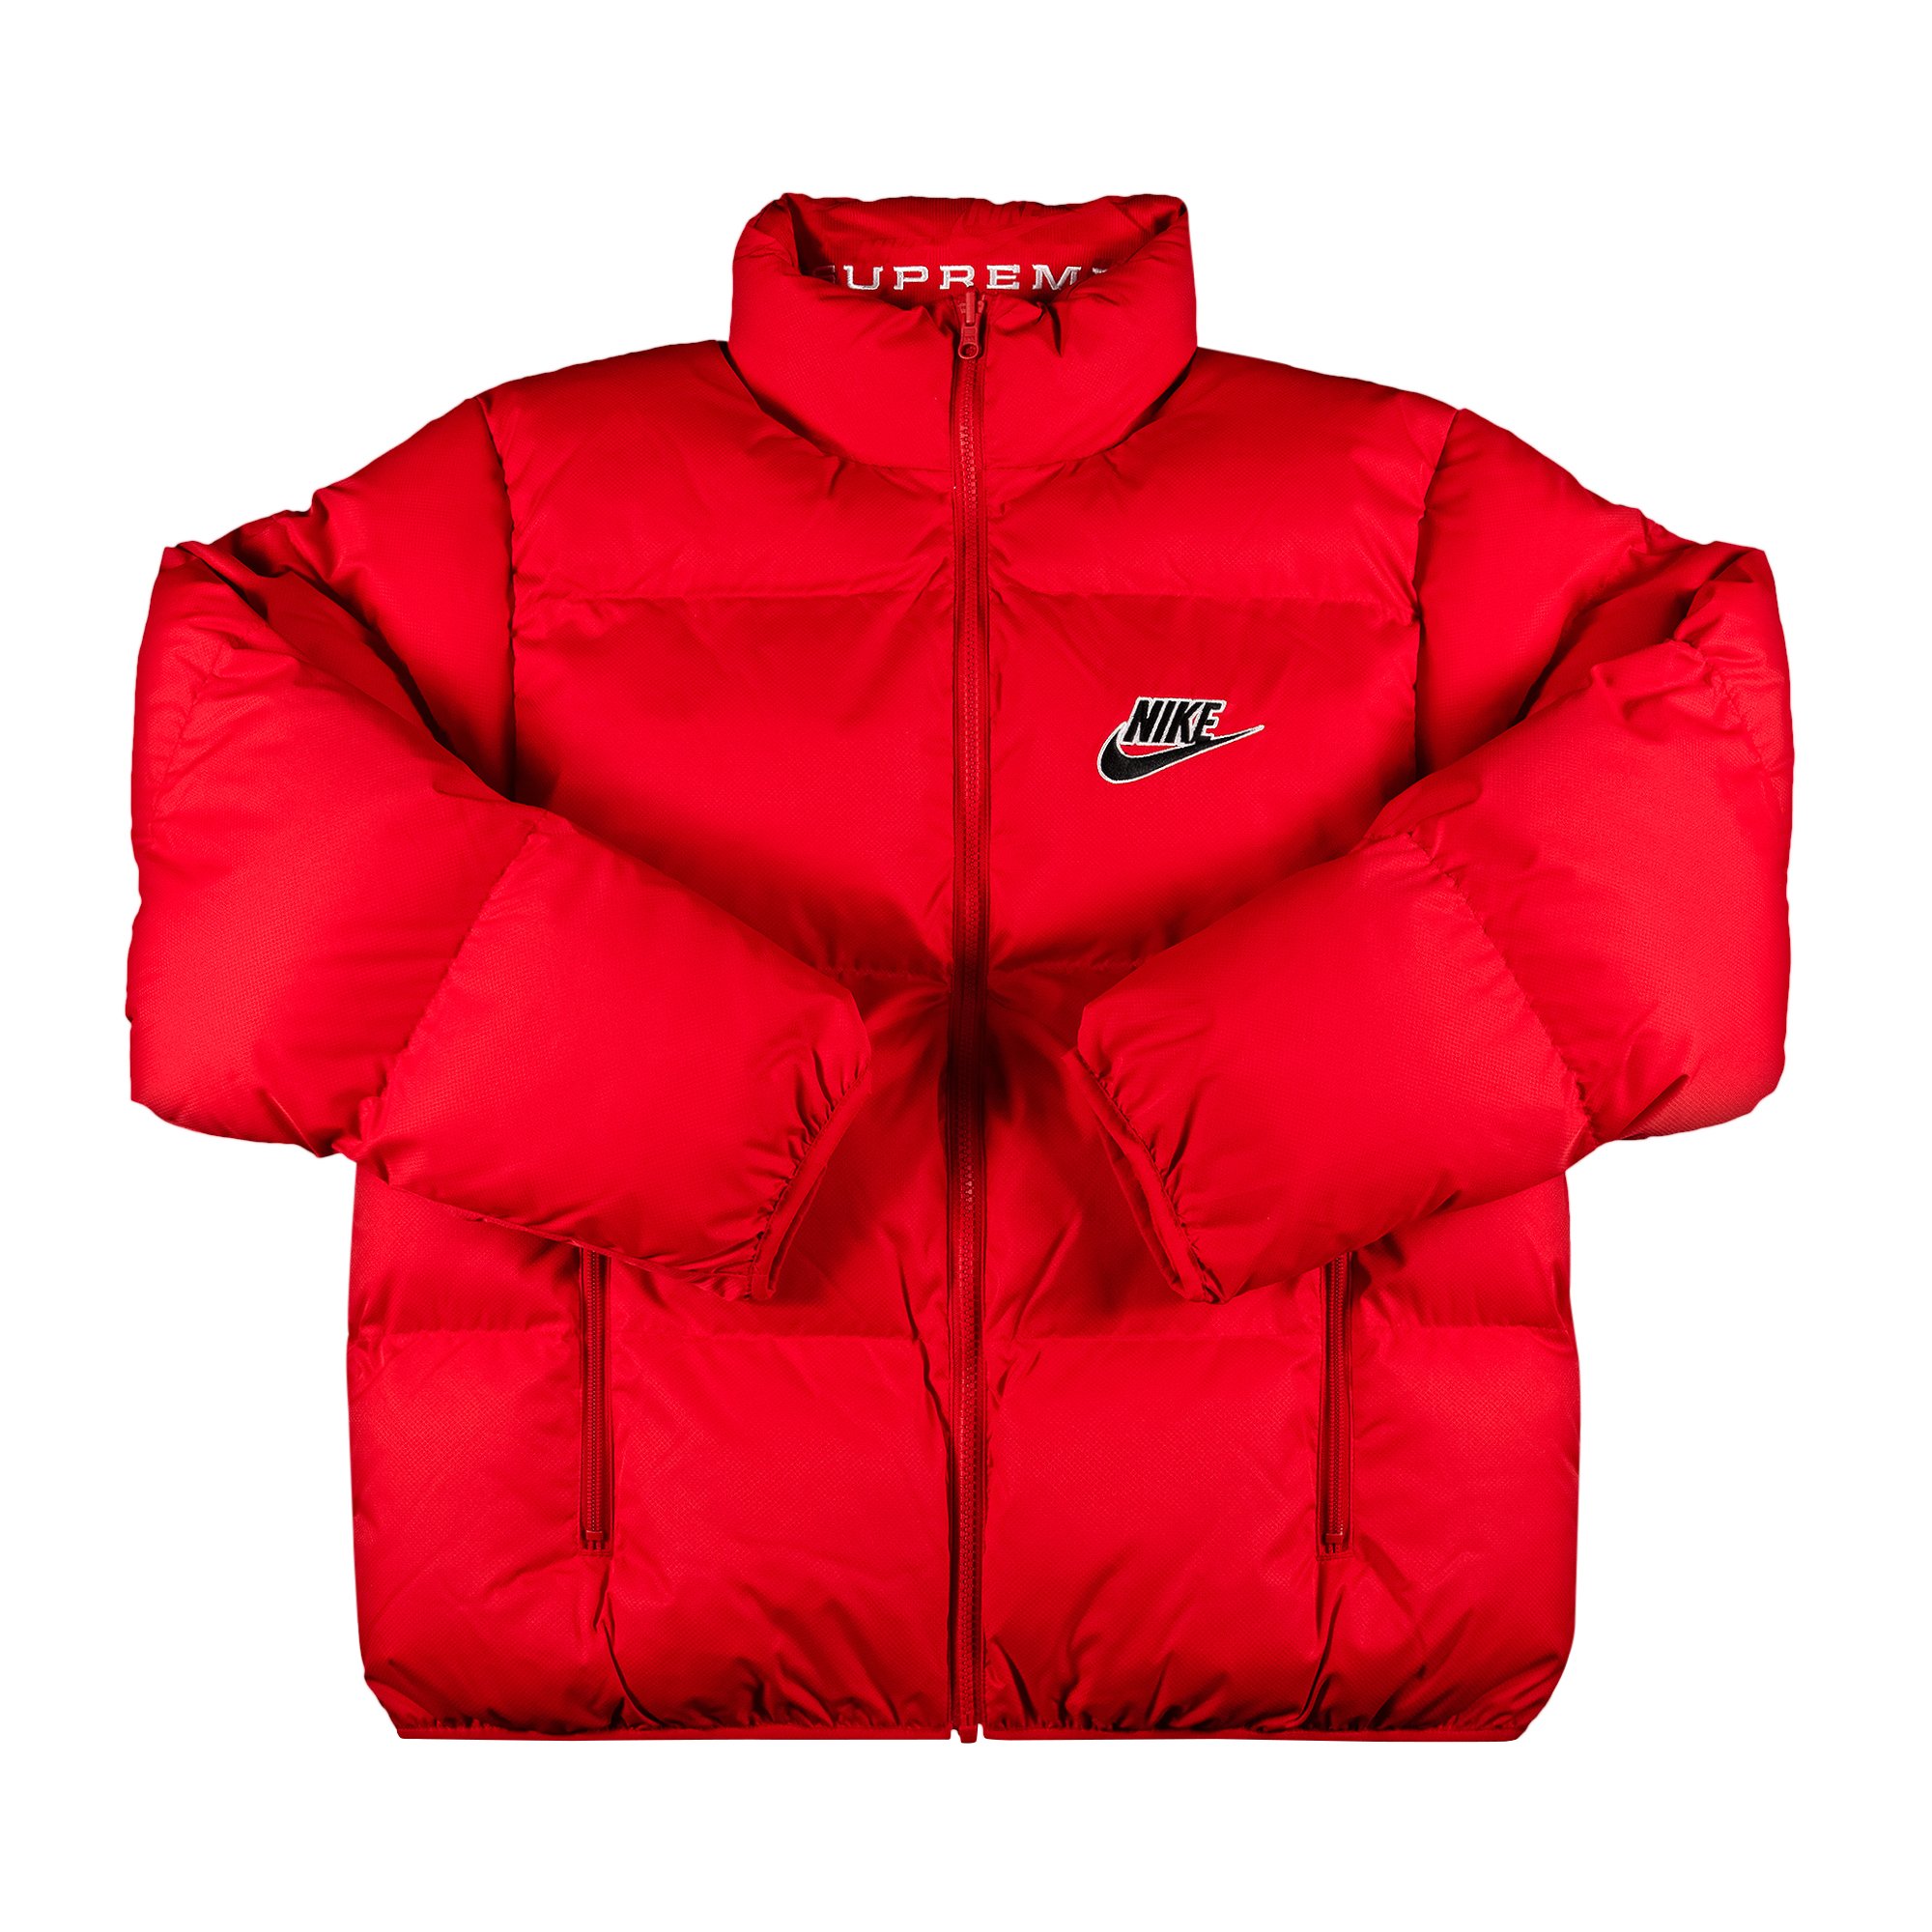 Buy Supreme x Nike Reversible Puffy Jacket 'Red' - SS21J8 RED | GOAT